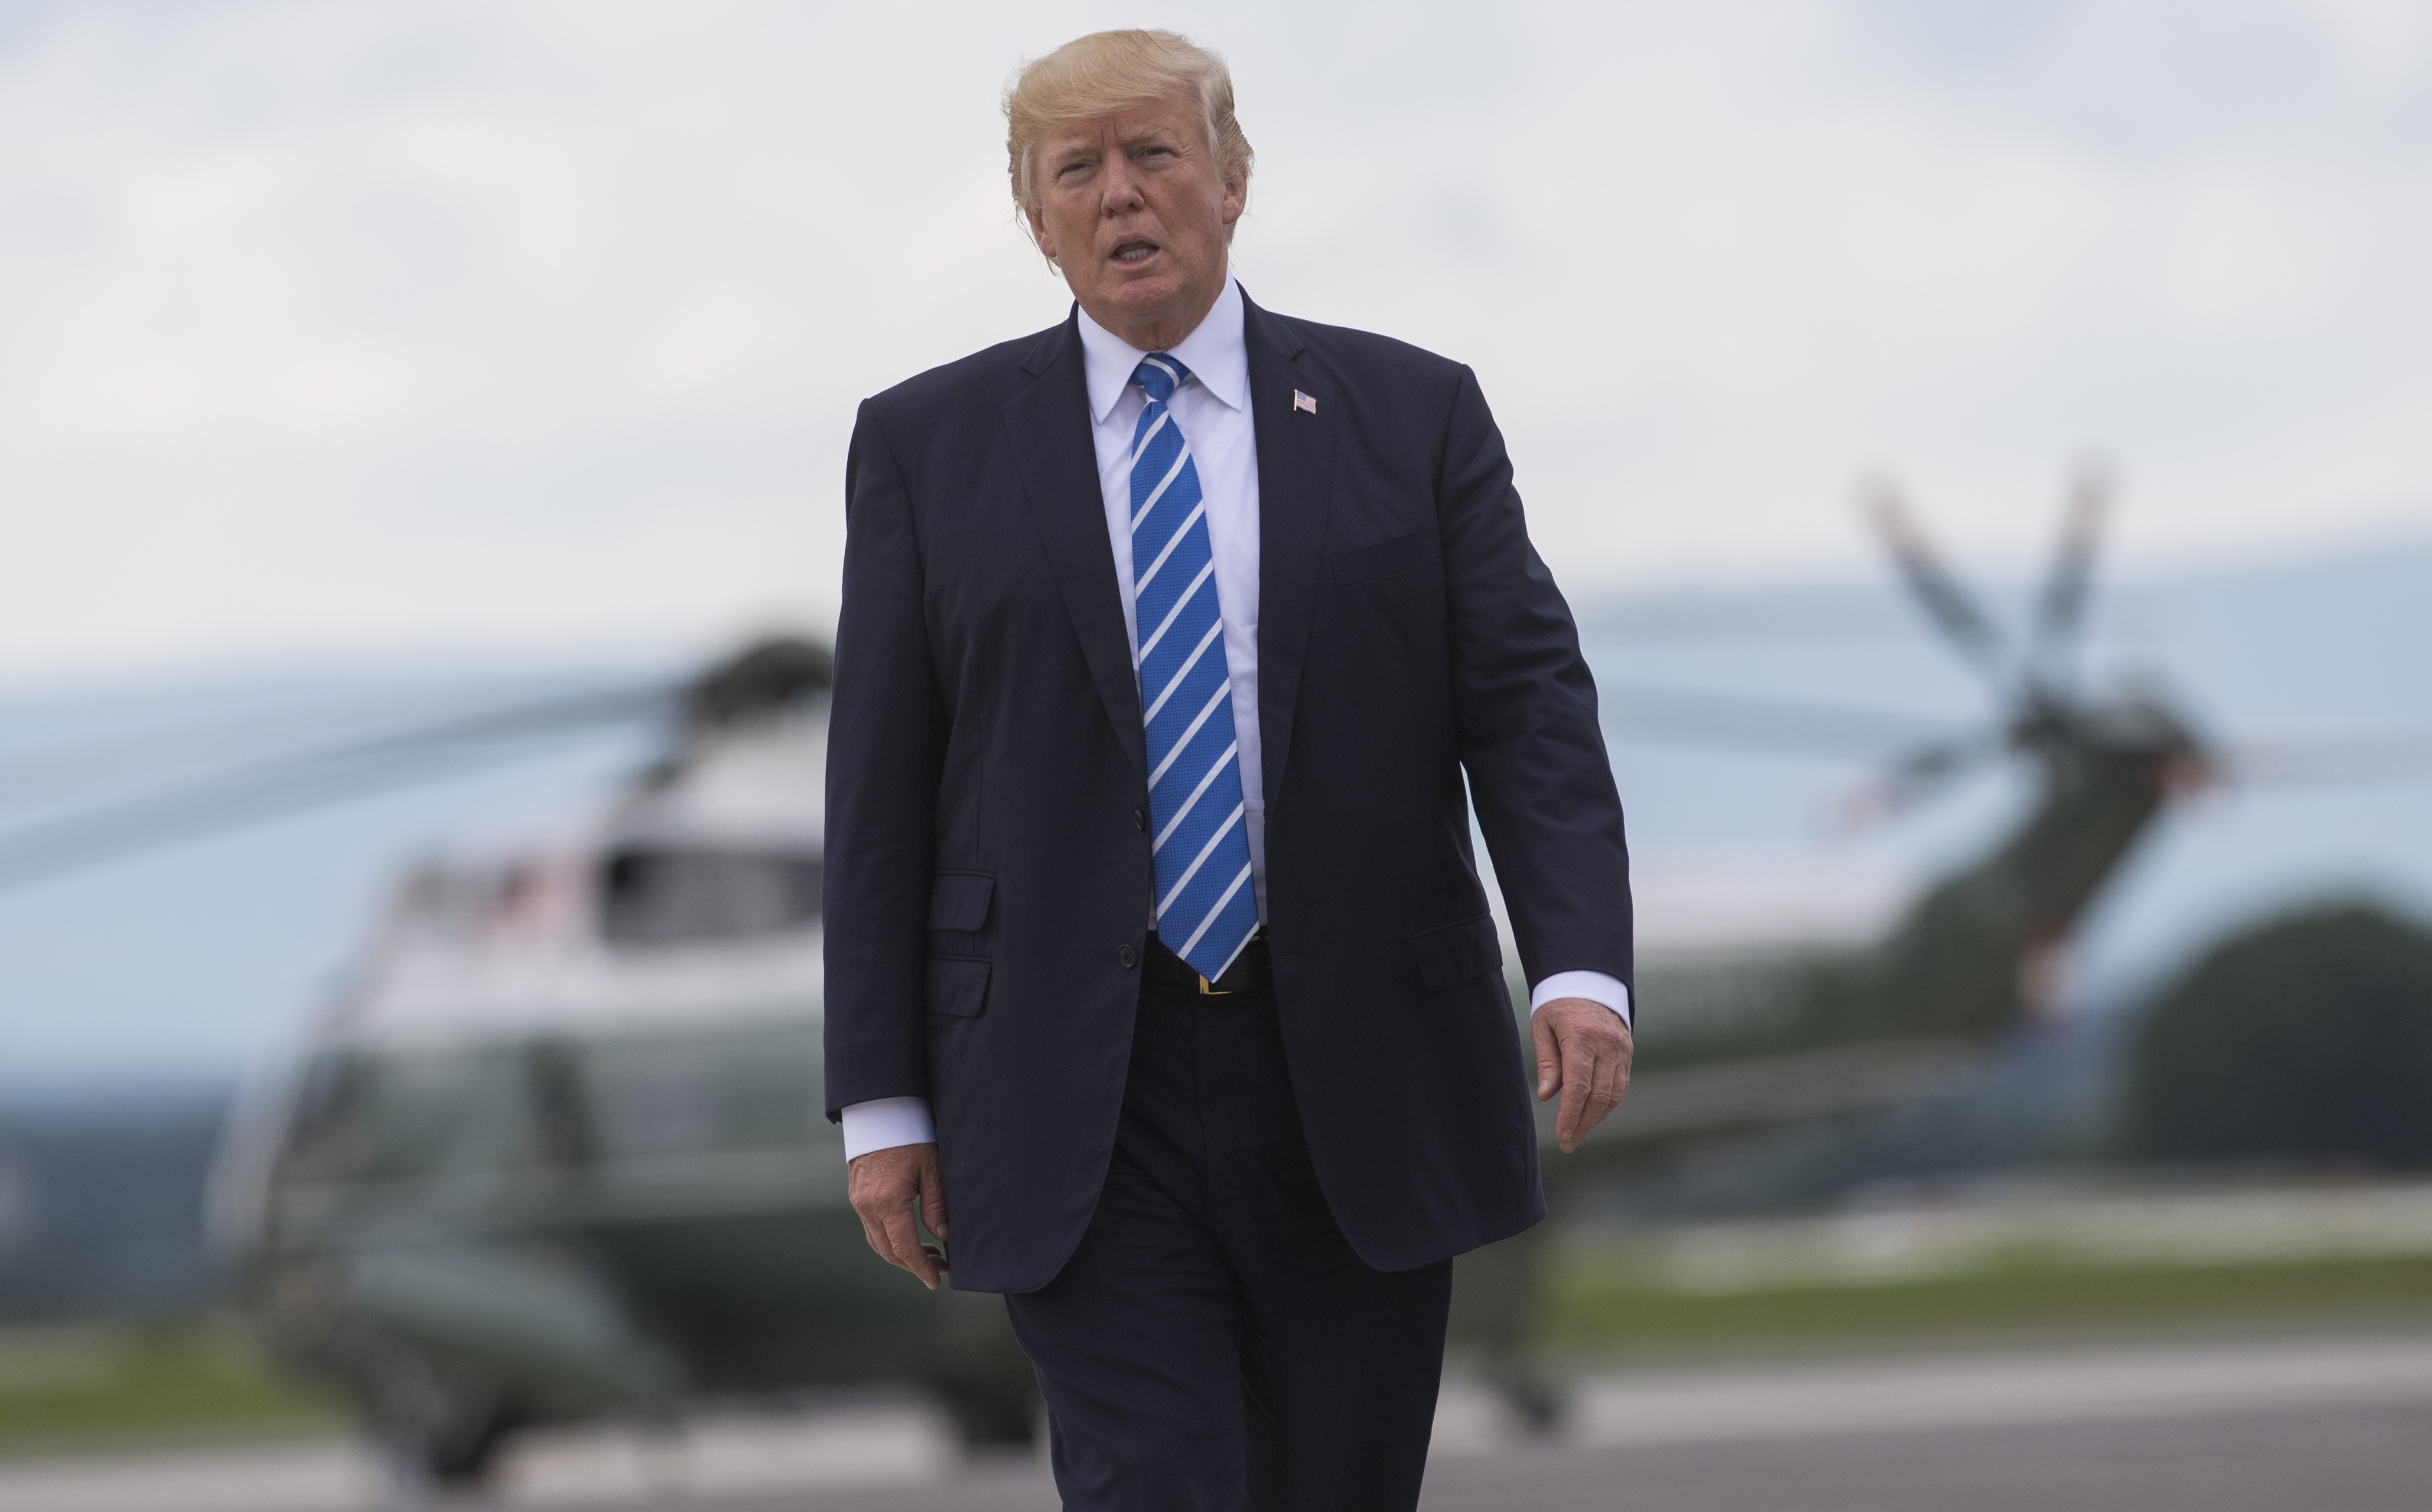 US President Donald Trump walks from Marine One to board Air Force One prior to departing from Hagerstown Regional Airport in Hagerstown, Maryland, on August 18, 2017, following meetings at Camp David and before returning to Bedminster, New Jersey to continue his vacation. (Saul Loeb&mdash;AFP/Getty Images)